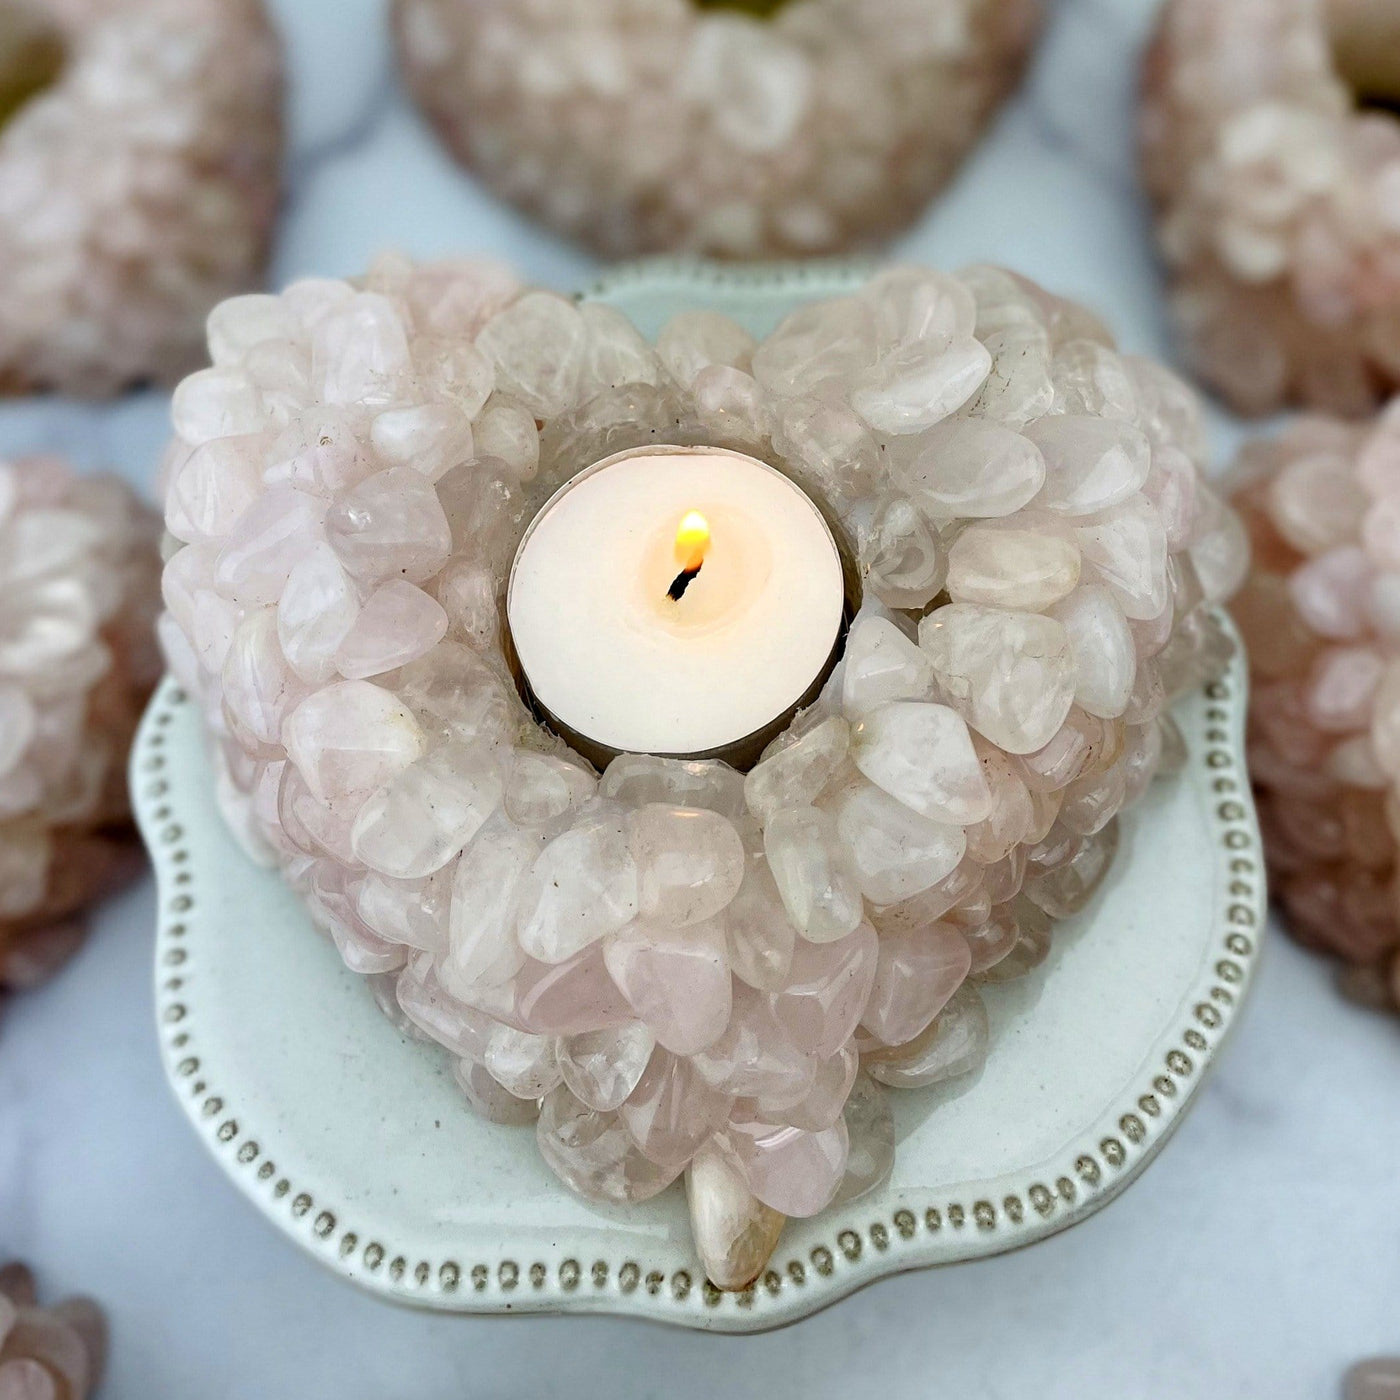 Up close shot of Rose Quartz Tumbled stone Heart Candle Holder with candle inside